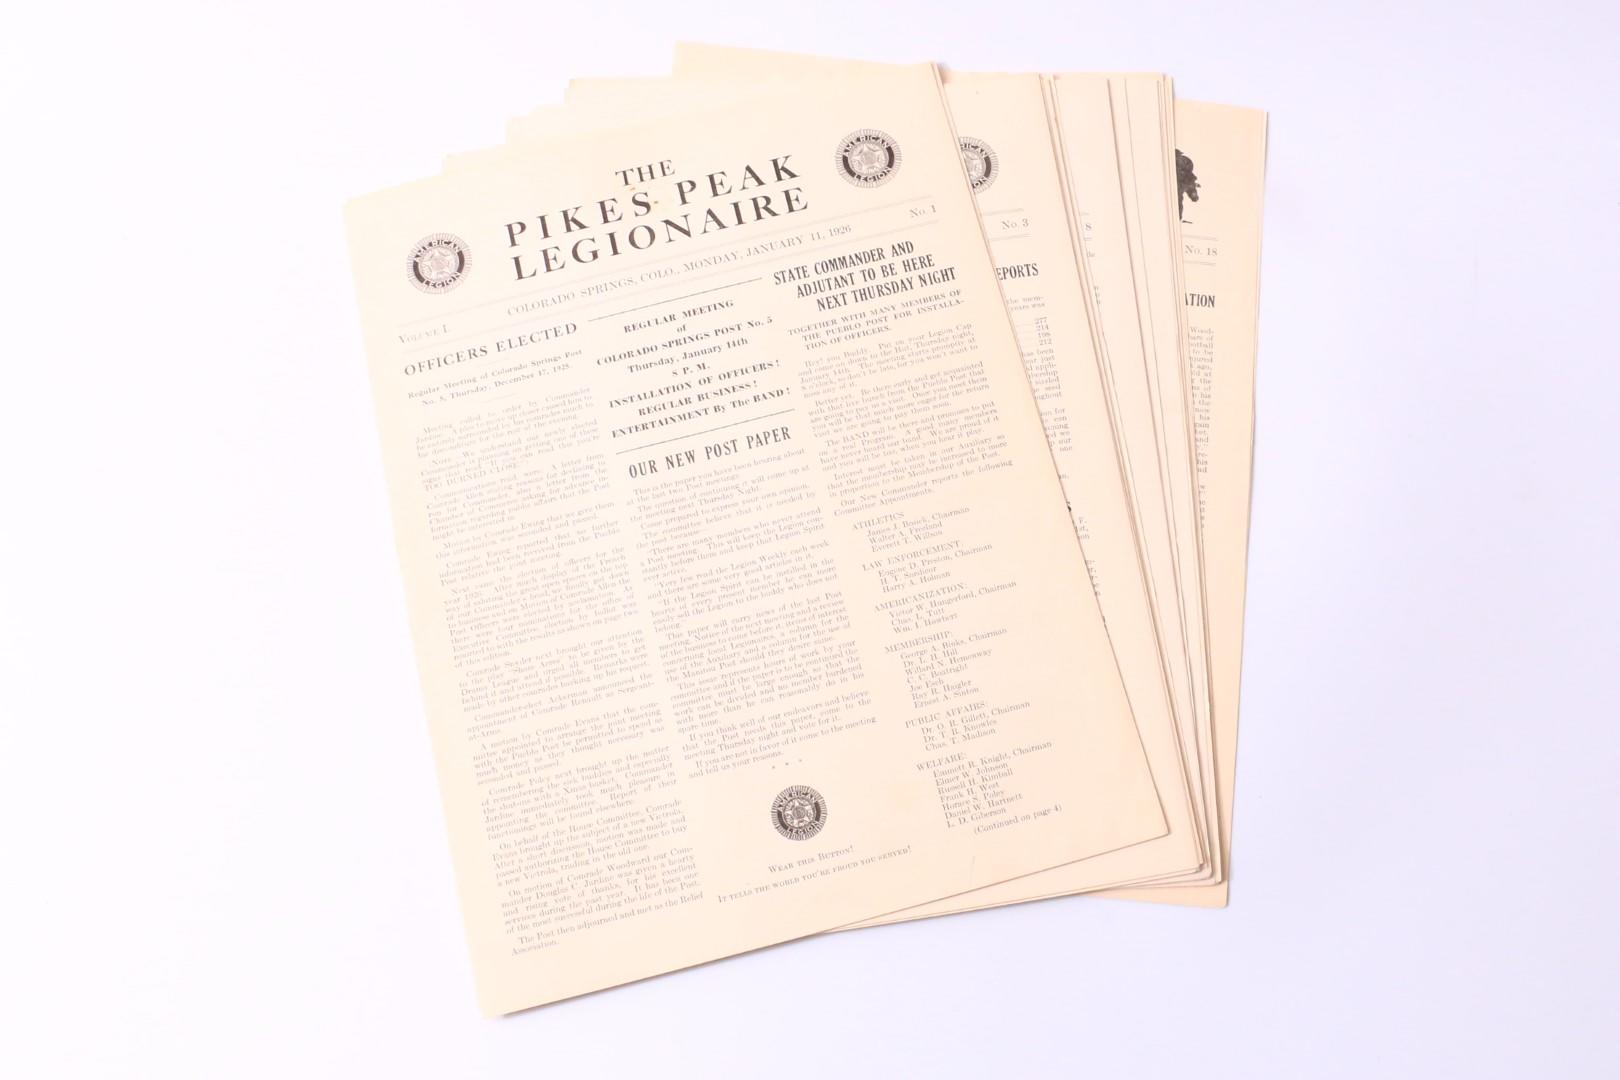 Various - The Pikes Peak Legionaire [comprising] Volume I issues 1-18 - None, 1926, First Edition.